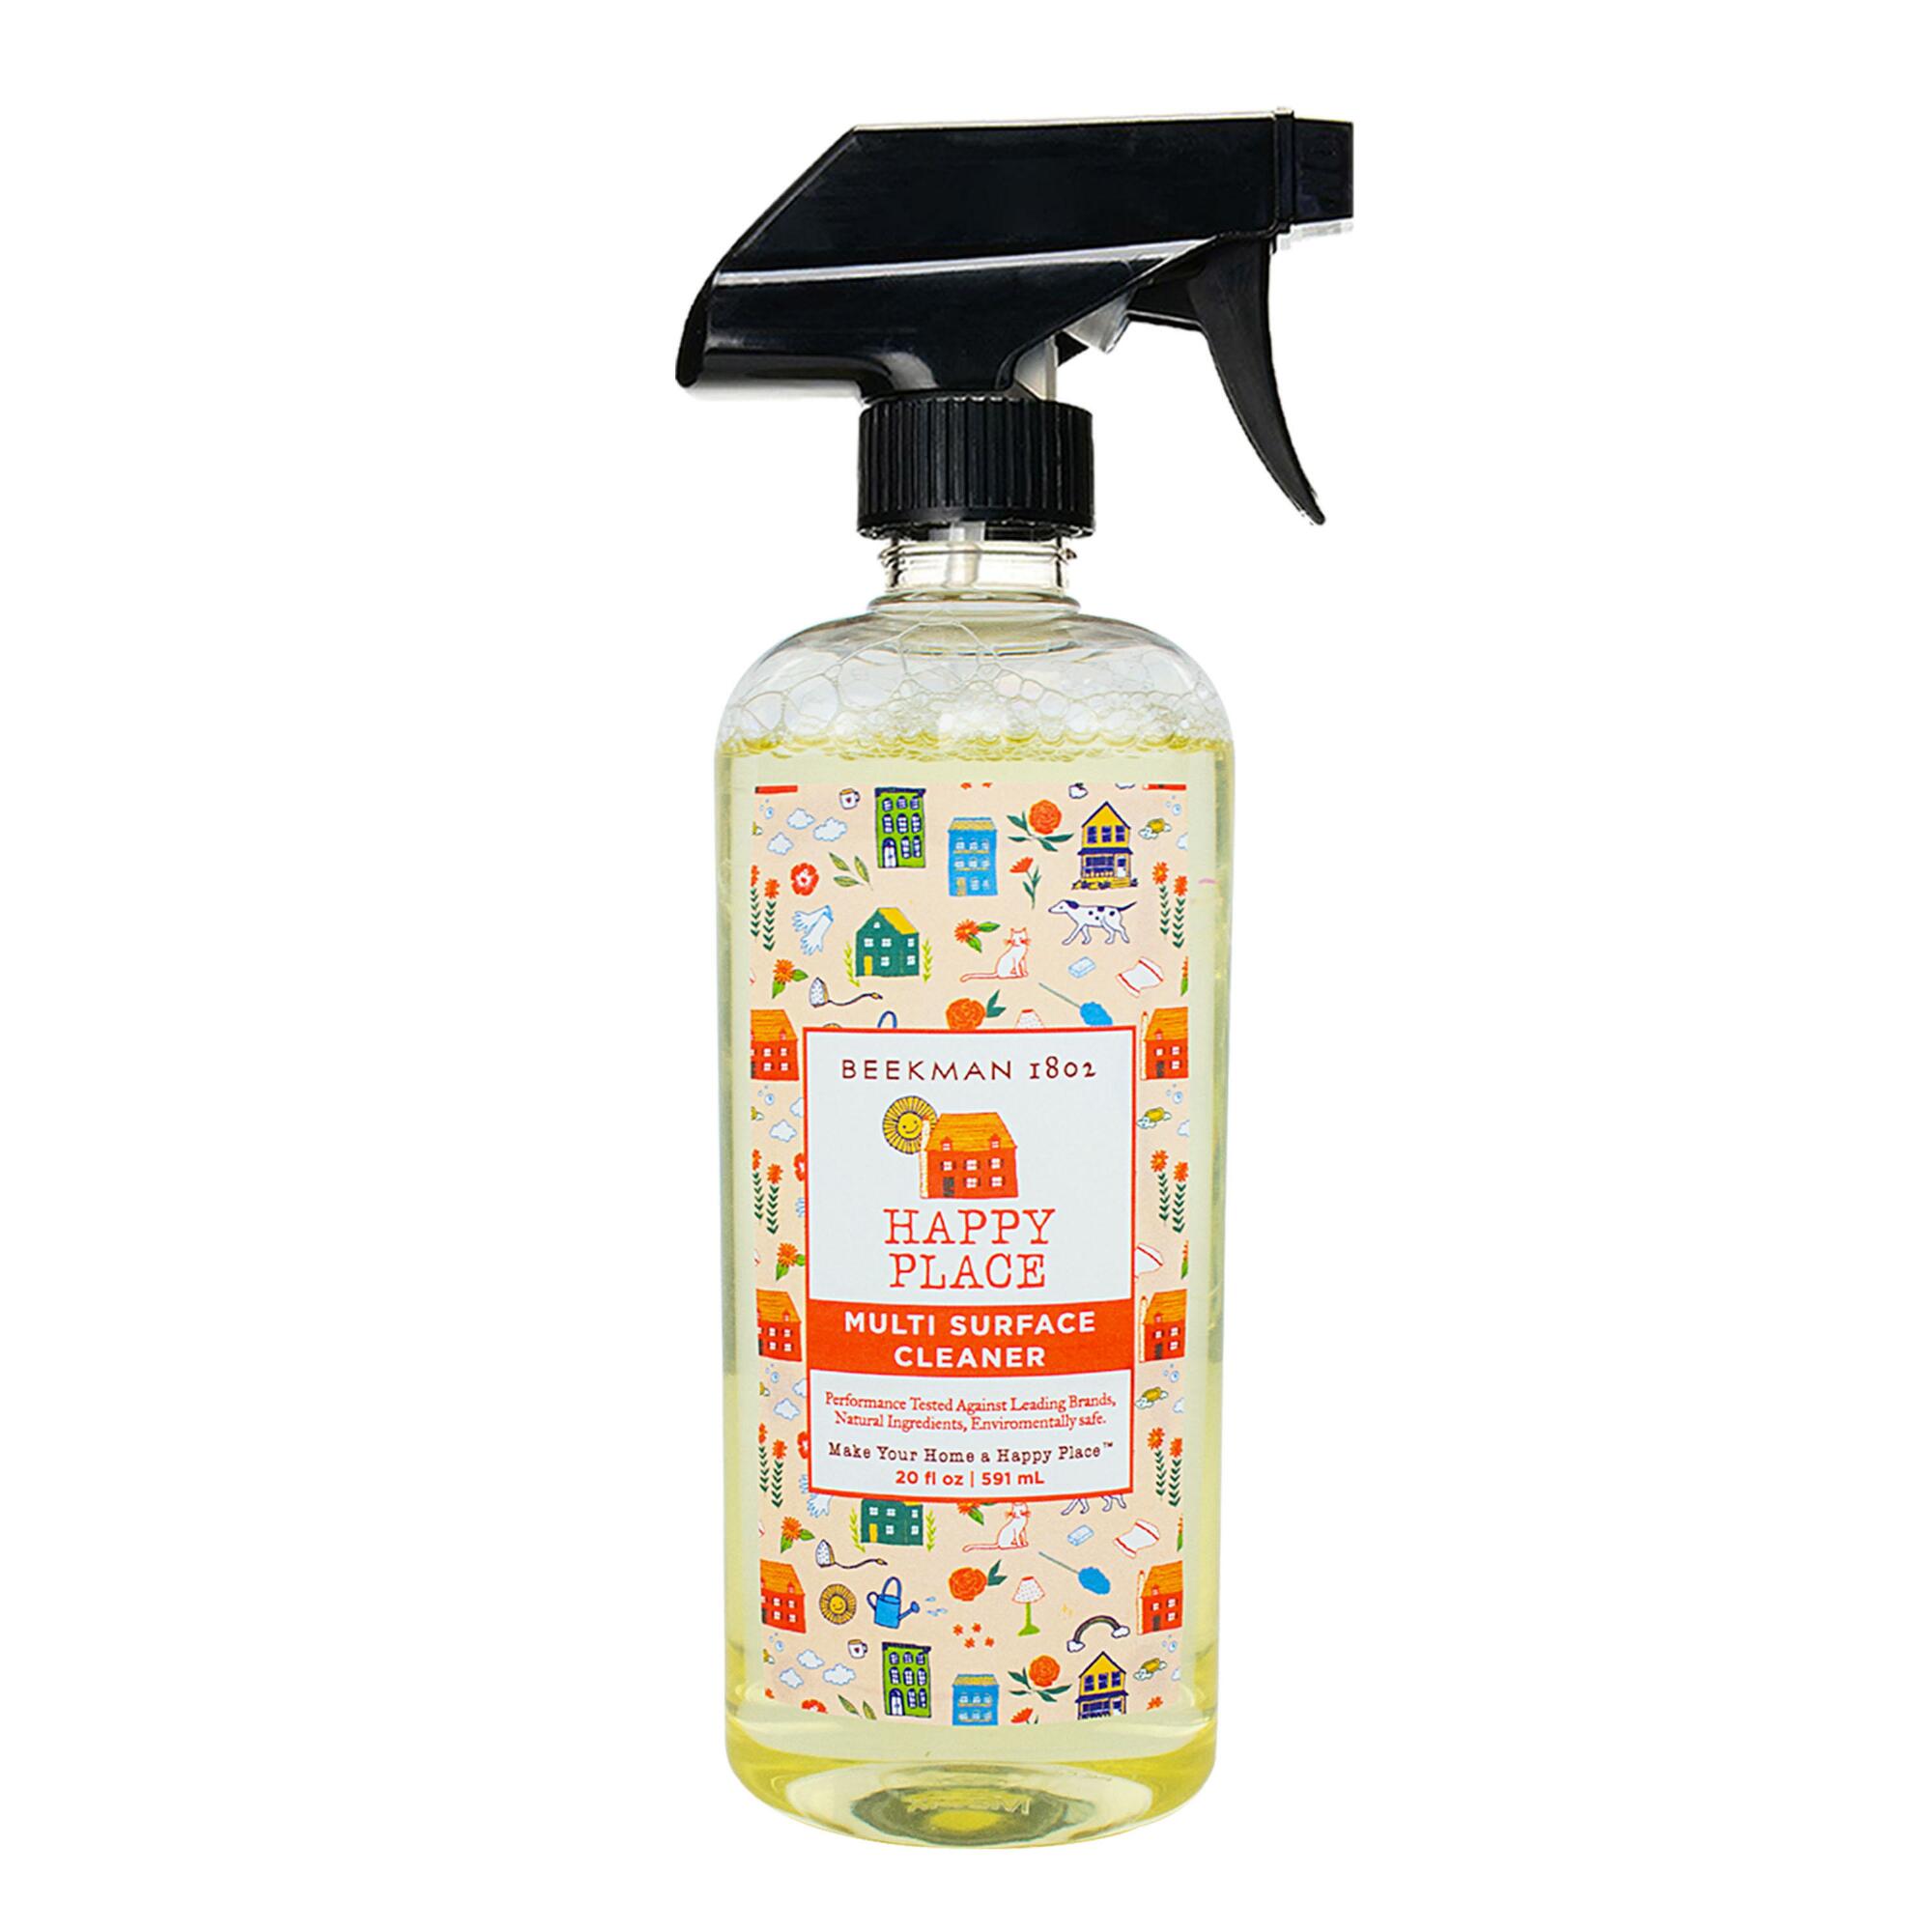 Happy Place Botanical Multi Surface Cleaner by World Market